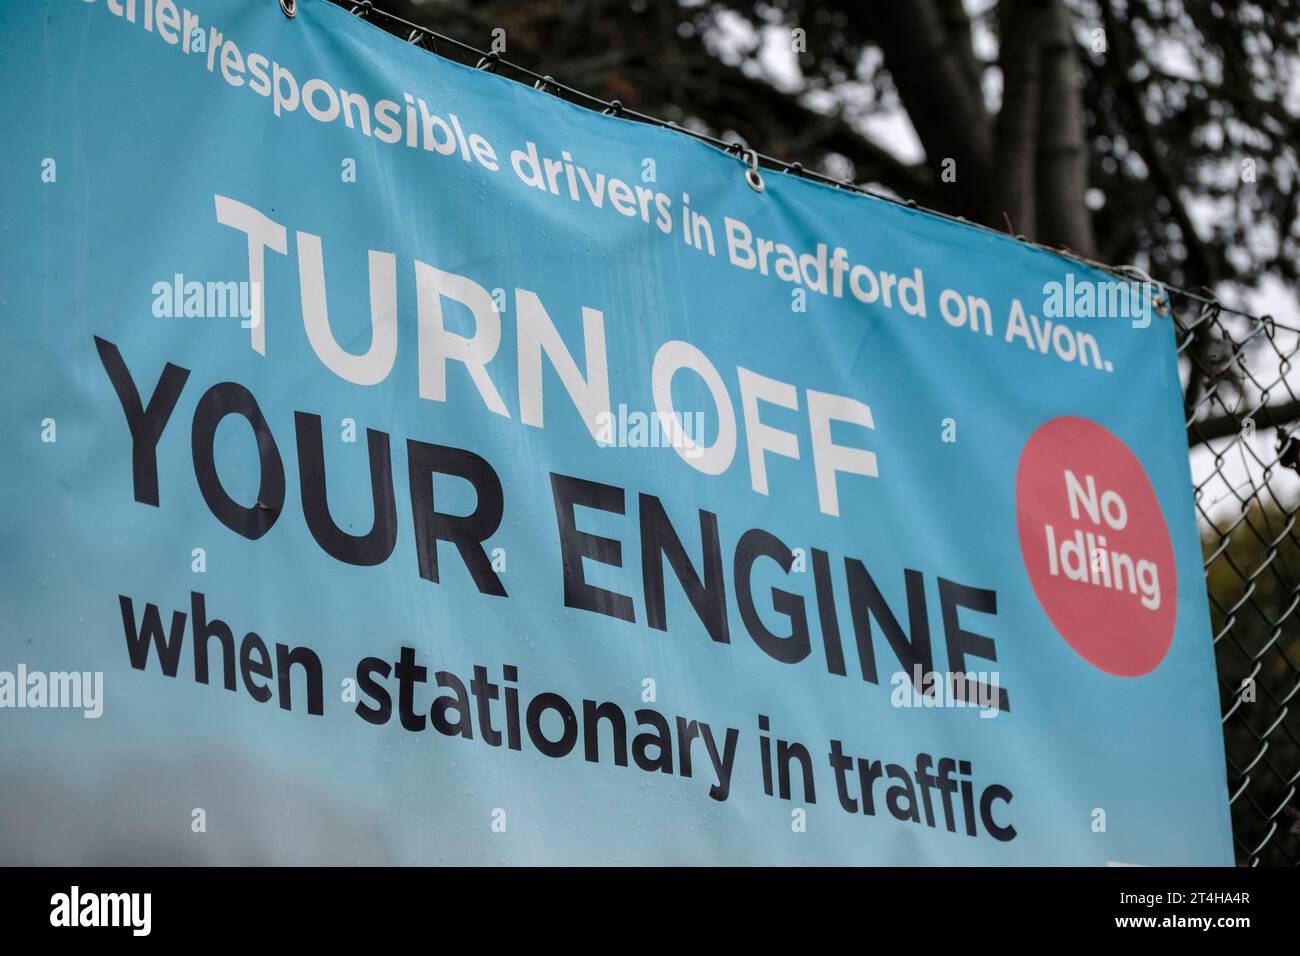 Car pollution sign turn off your engine when stationary in traffic Bradford on Avon Wiltshire UK Stock Photo